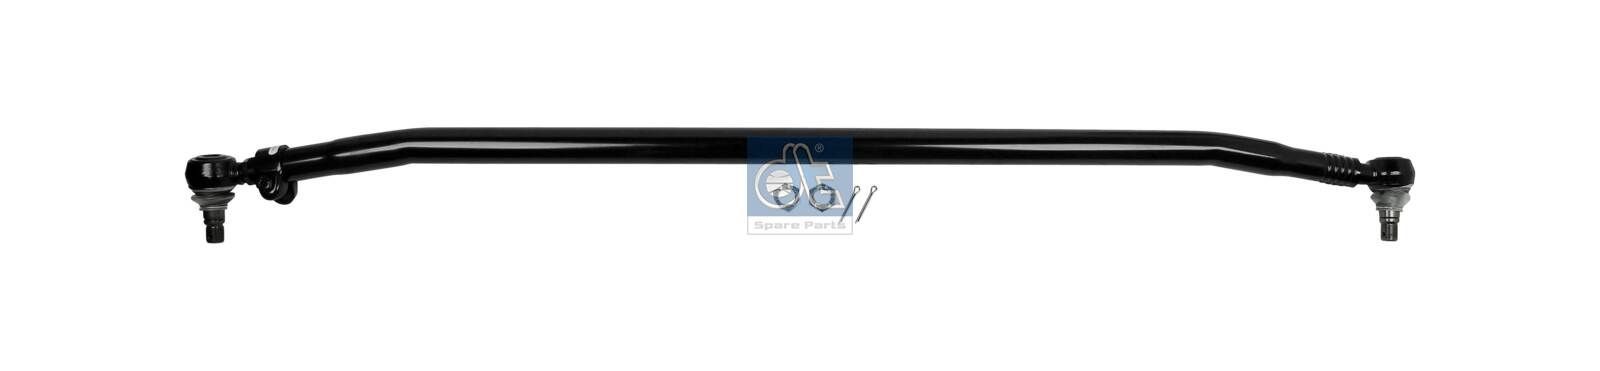 DT Spare Parts Cone Size: 30mm, Length: 1625mm Tie Rod 3.63007 buy